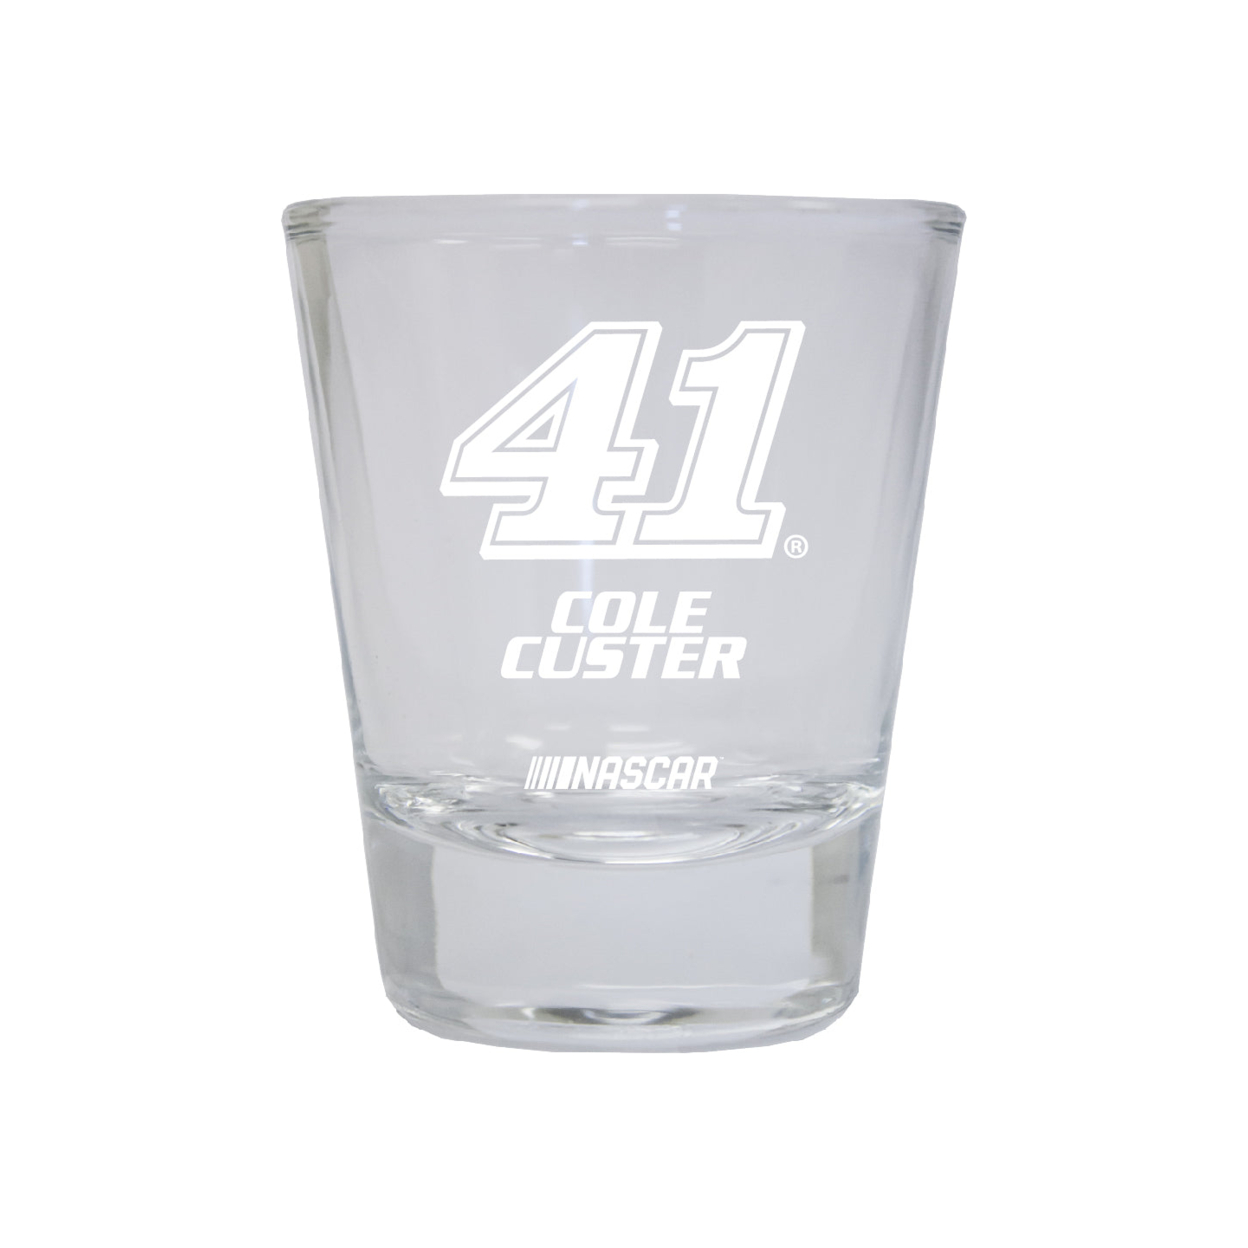 Cole Custer #41 Nascar Etched Round Shot Glass New For 2022